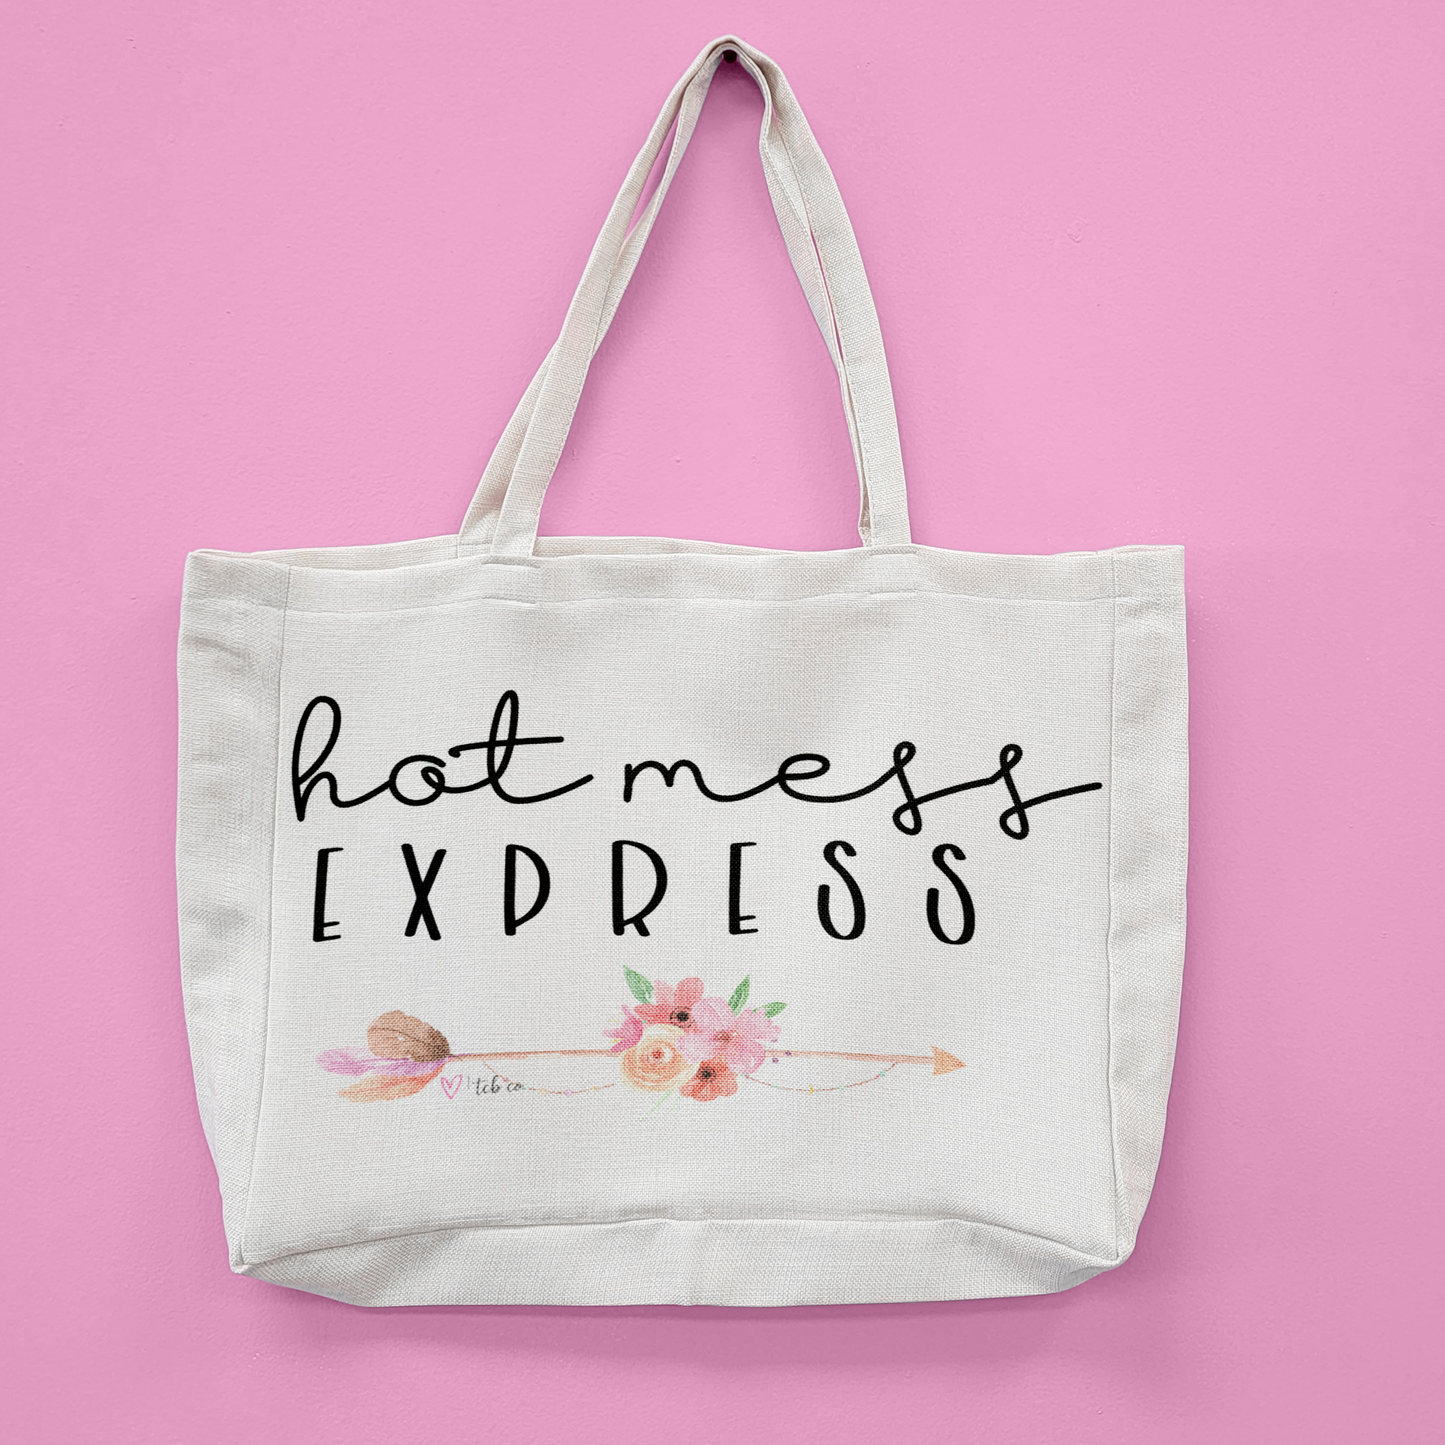 Hot Mess Express Oversized Tote Bag